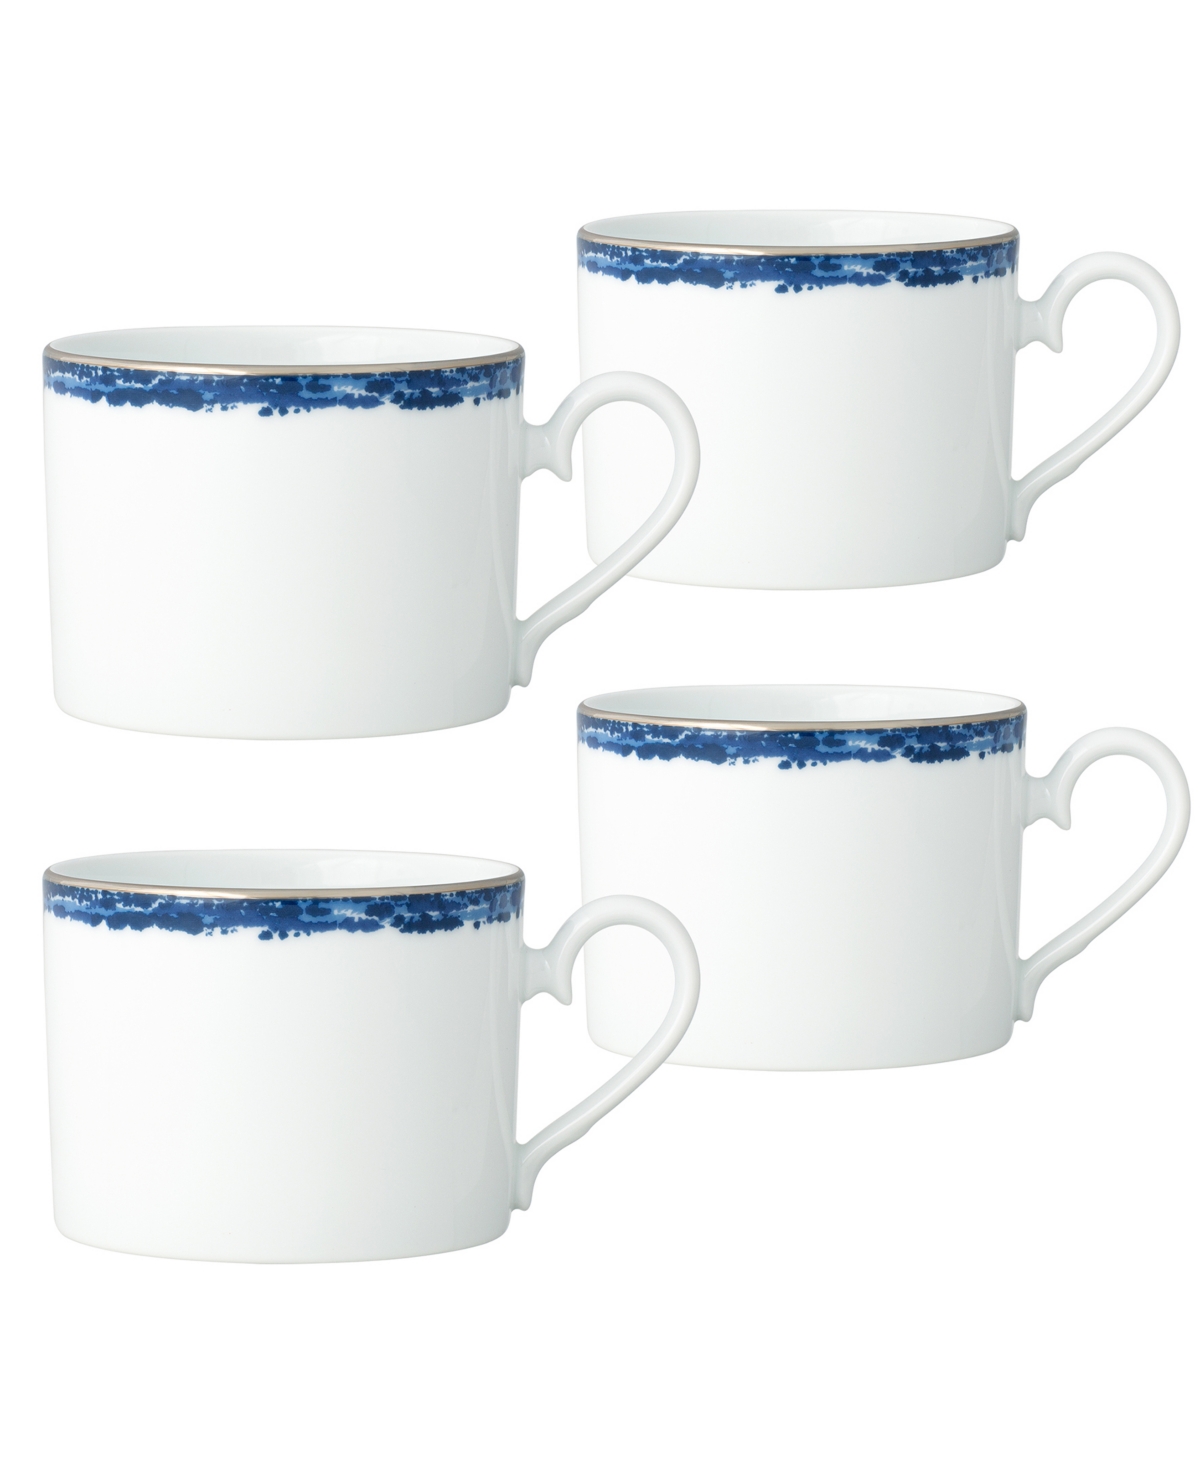 Noritake Rill 4 Piece Cup Set, Service For 4 In Blue